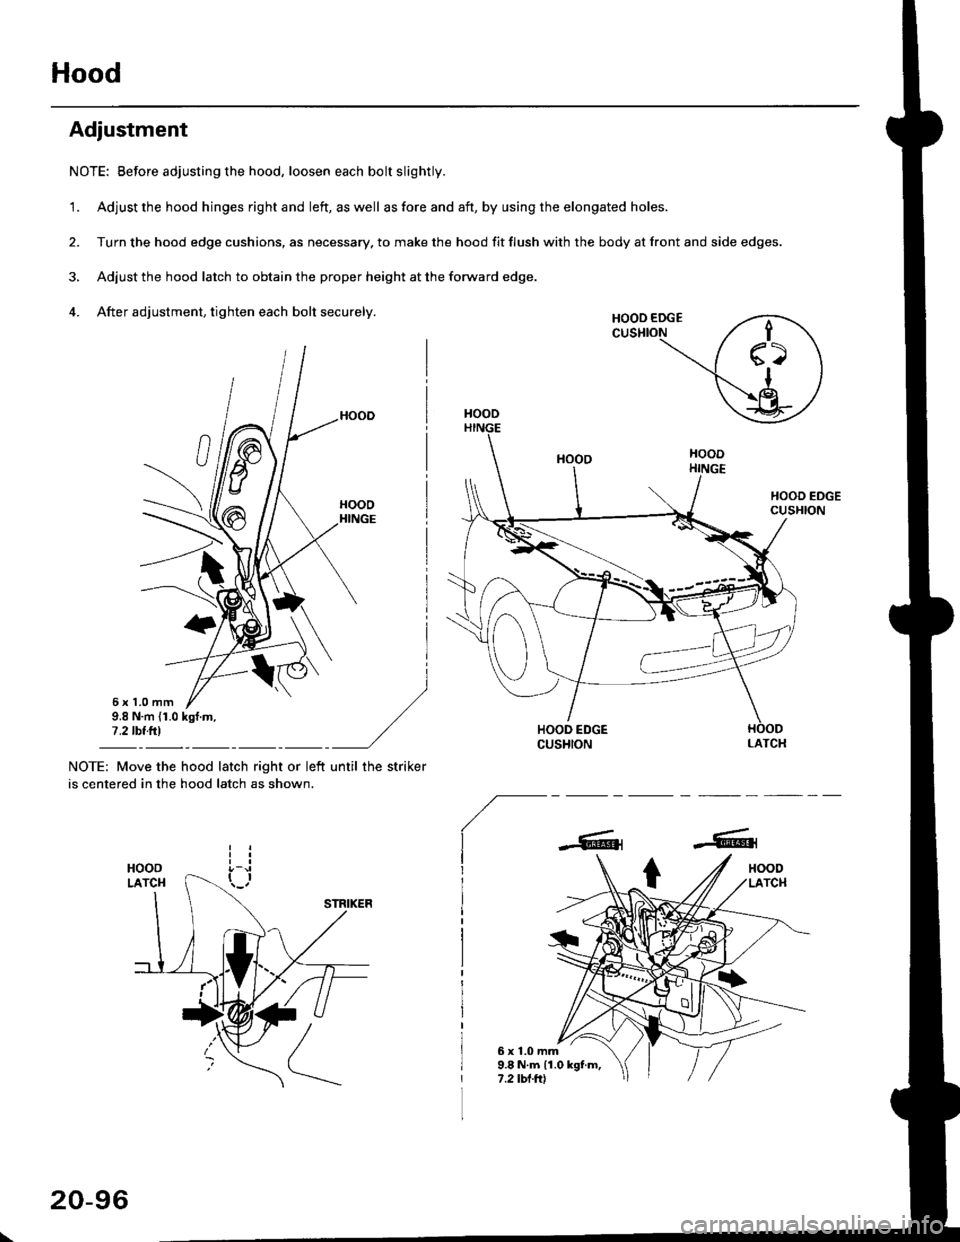 HONDA CIVIC 1996 6.G Workshop Manual Hood
Adjustment
NOTE: Before adjusting the hood, loosen each bolt slightly.
1. Adjust the hood hinges right and left, as well as fore and aft, by using the elongated holes.
2. Turn the hood edge cushi